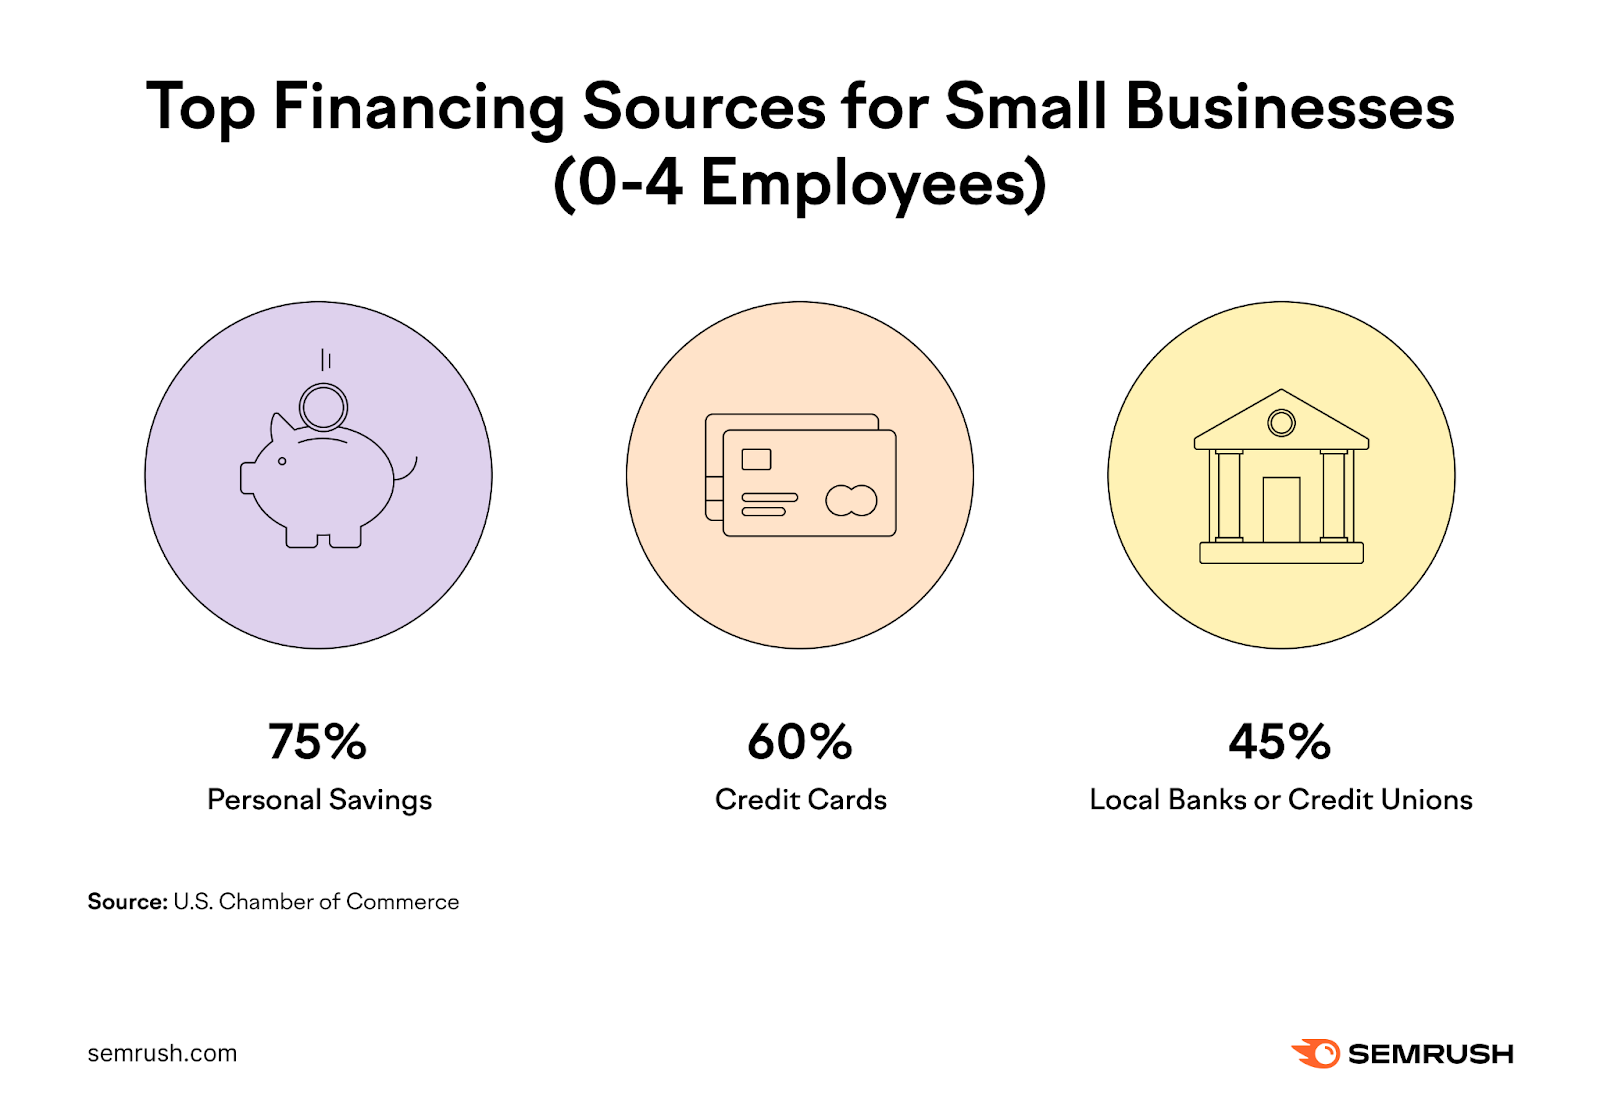 Top financing sources for small businesses